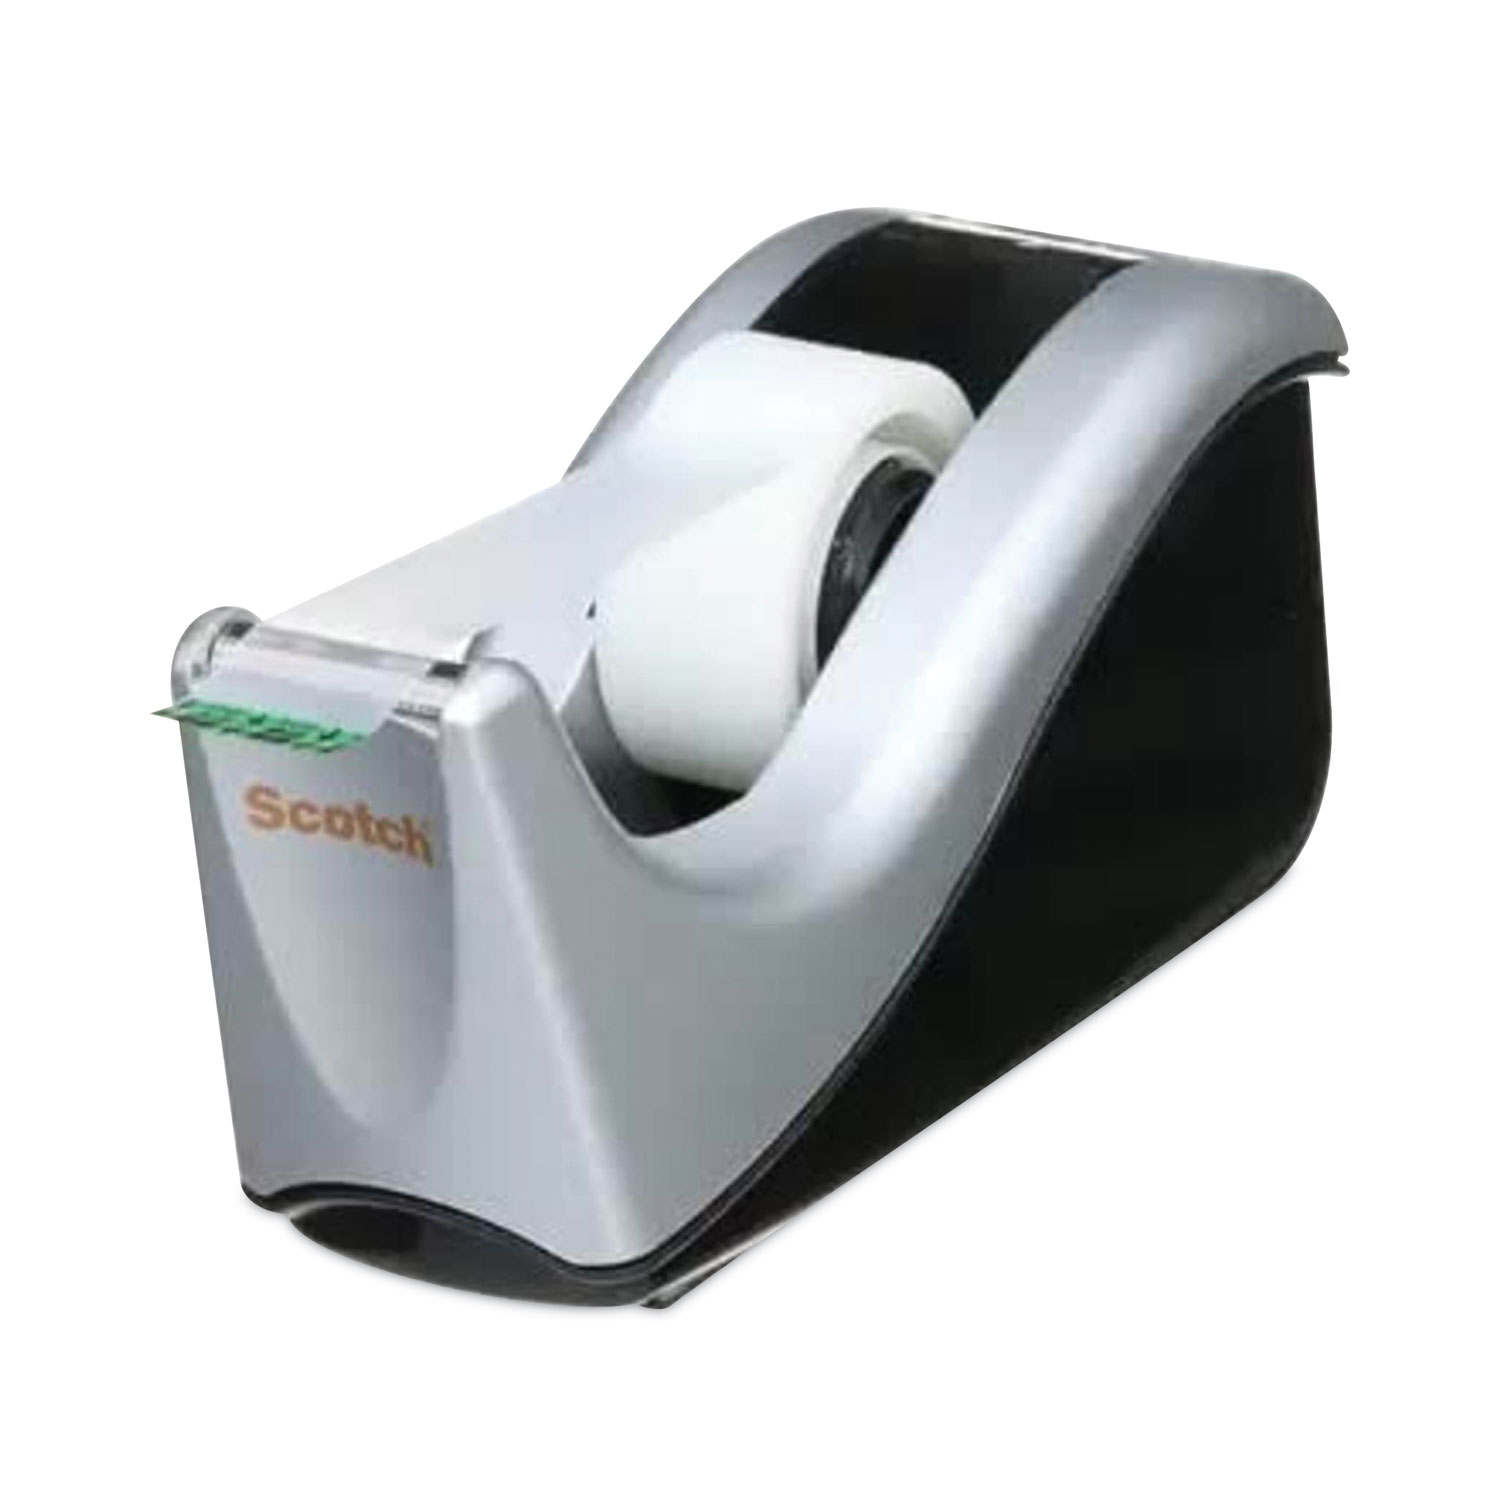 Always in Stock - Cole-Parmer Multi-Roll Tape Dispenser, 9-1/2 L; 1/Pk  from Cole-Parmer